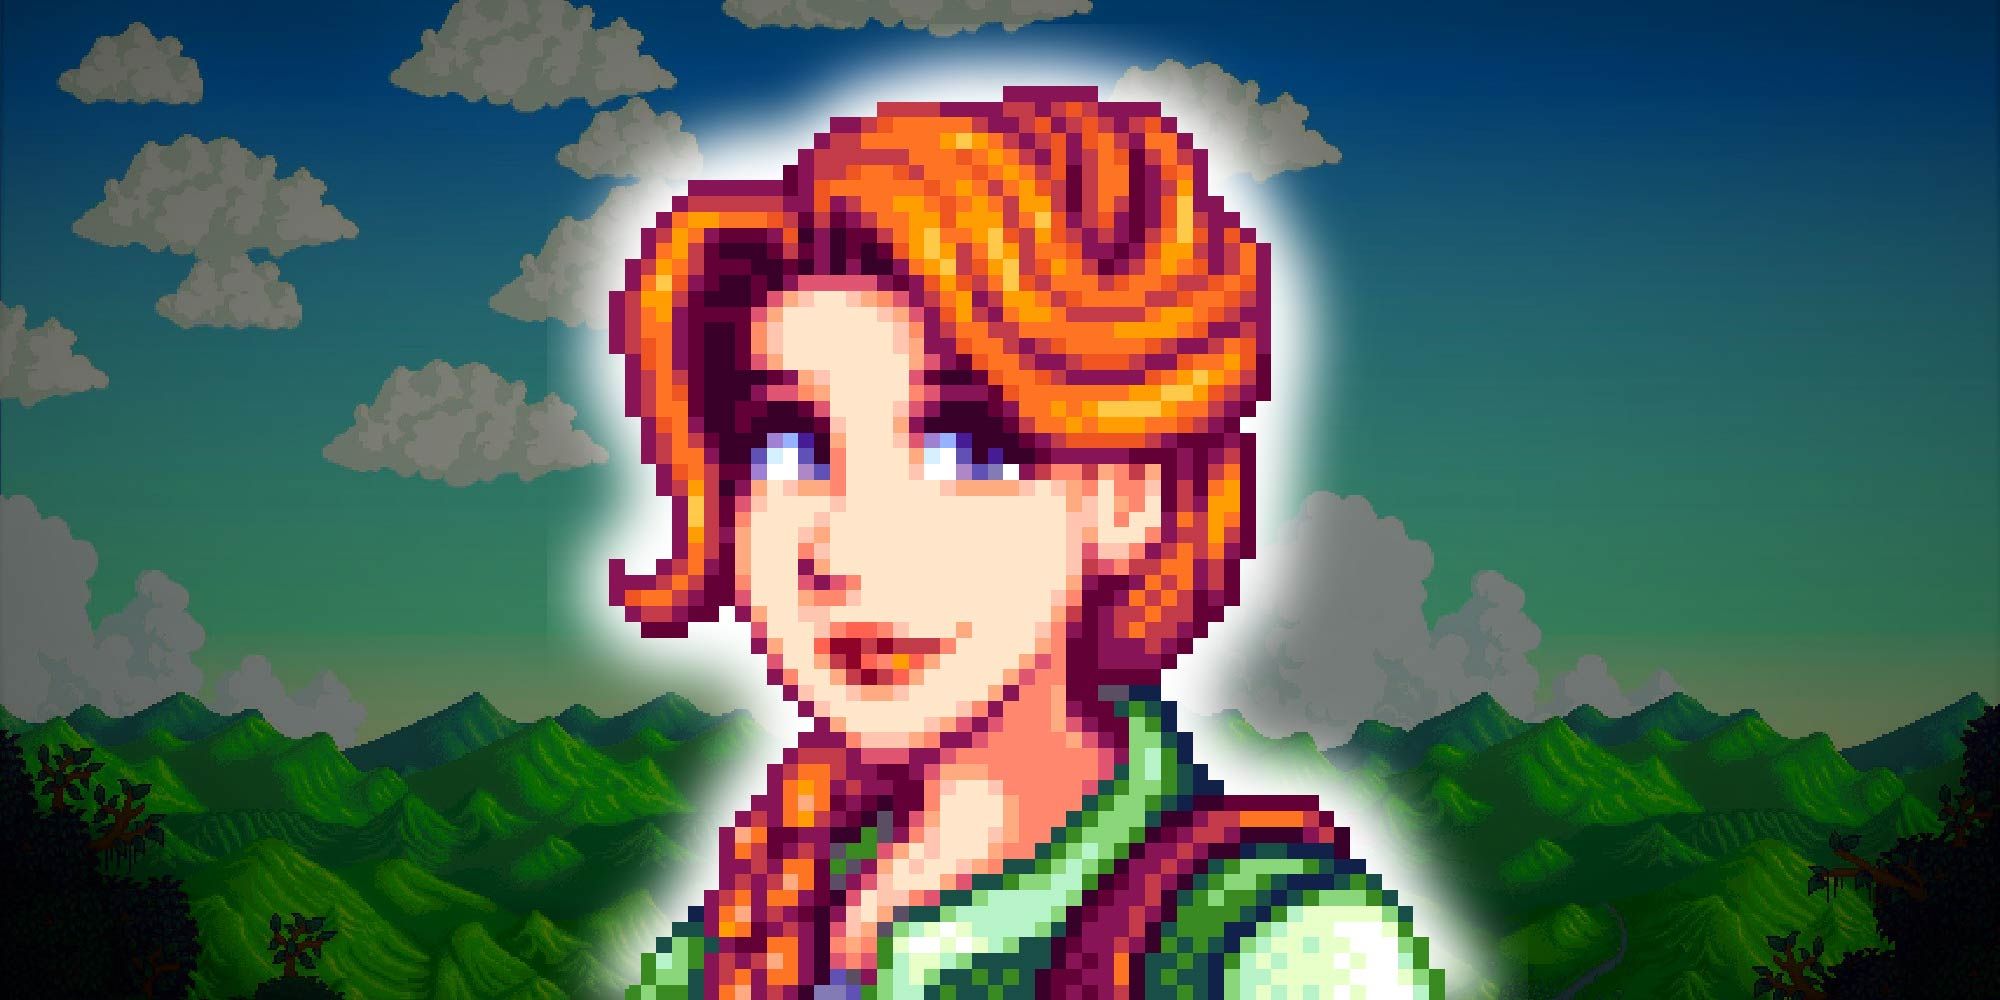 Stardew Valley Leah guide: Schedule, gifts and heart events